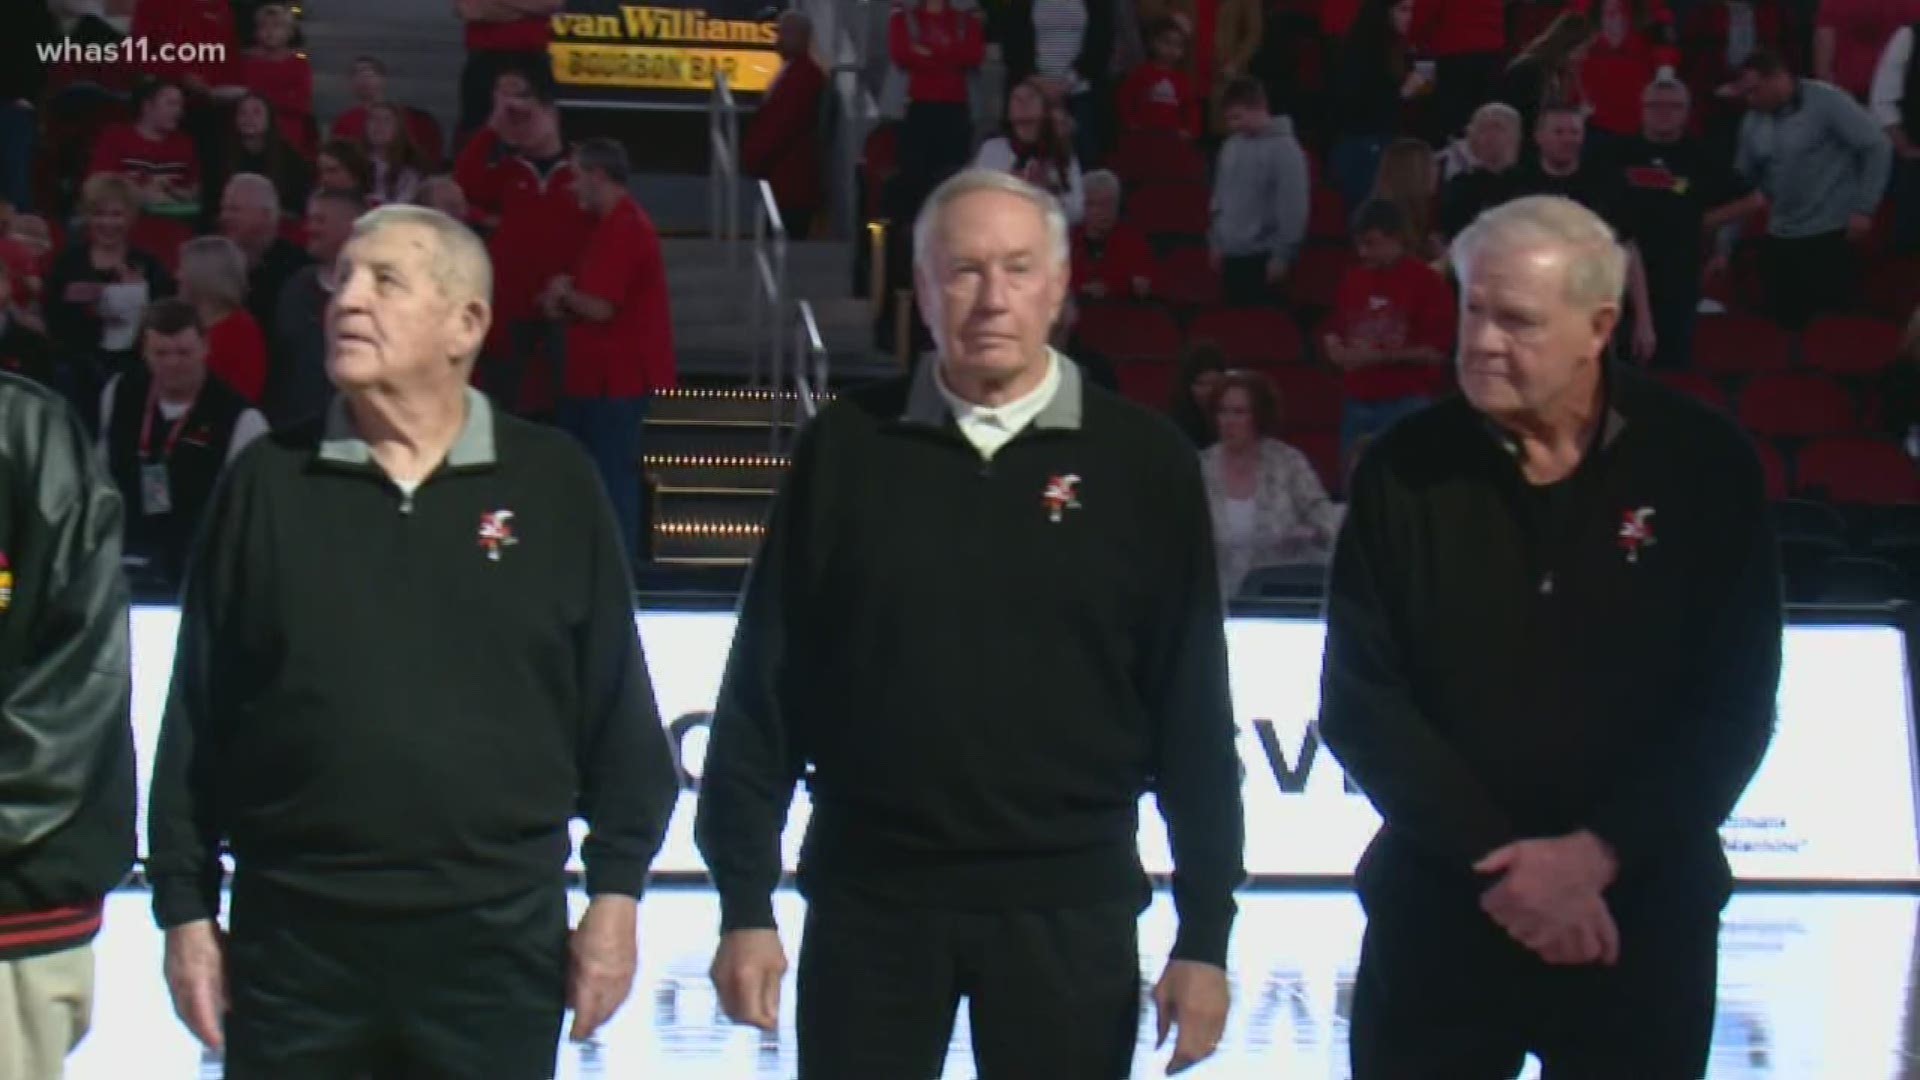 An all-star team featuring UofL Coach Denny Crum, Junior Bridgeman and Allen Murphy were honored to mark the 45th anniversary of the accomplishment.